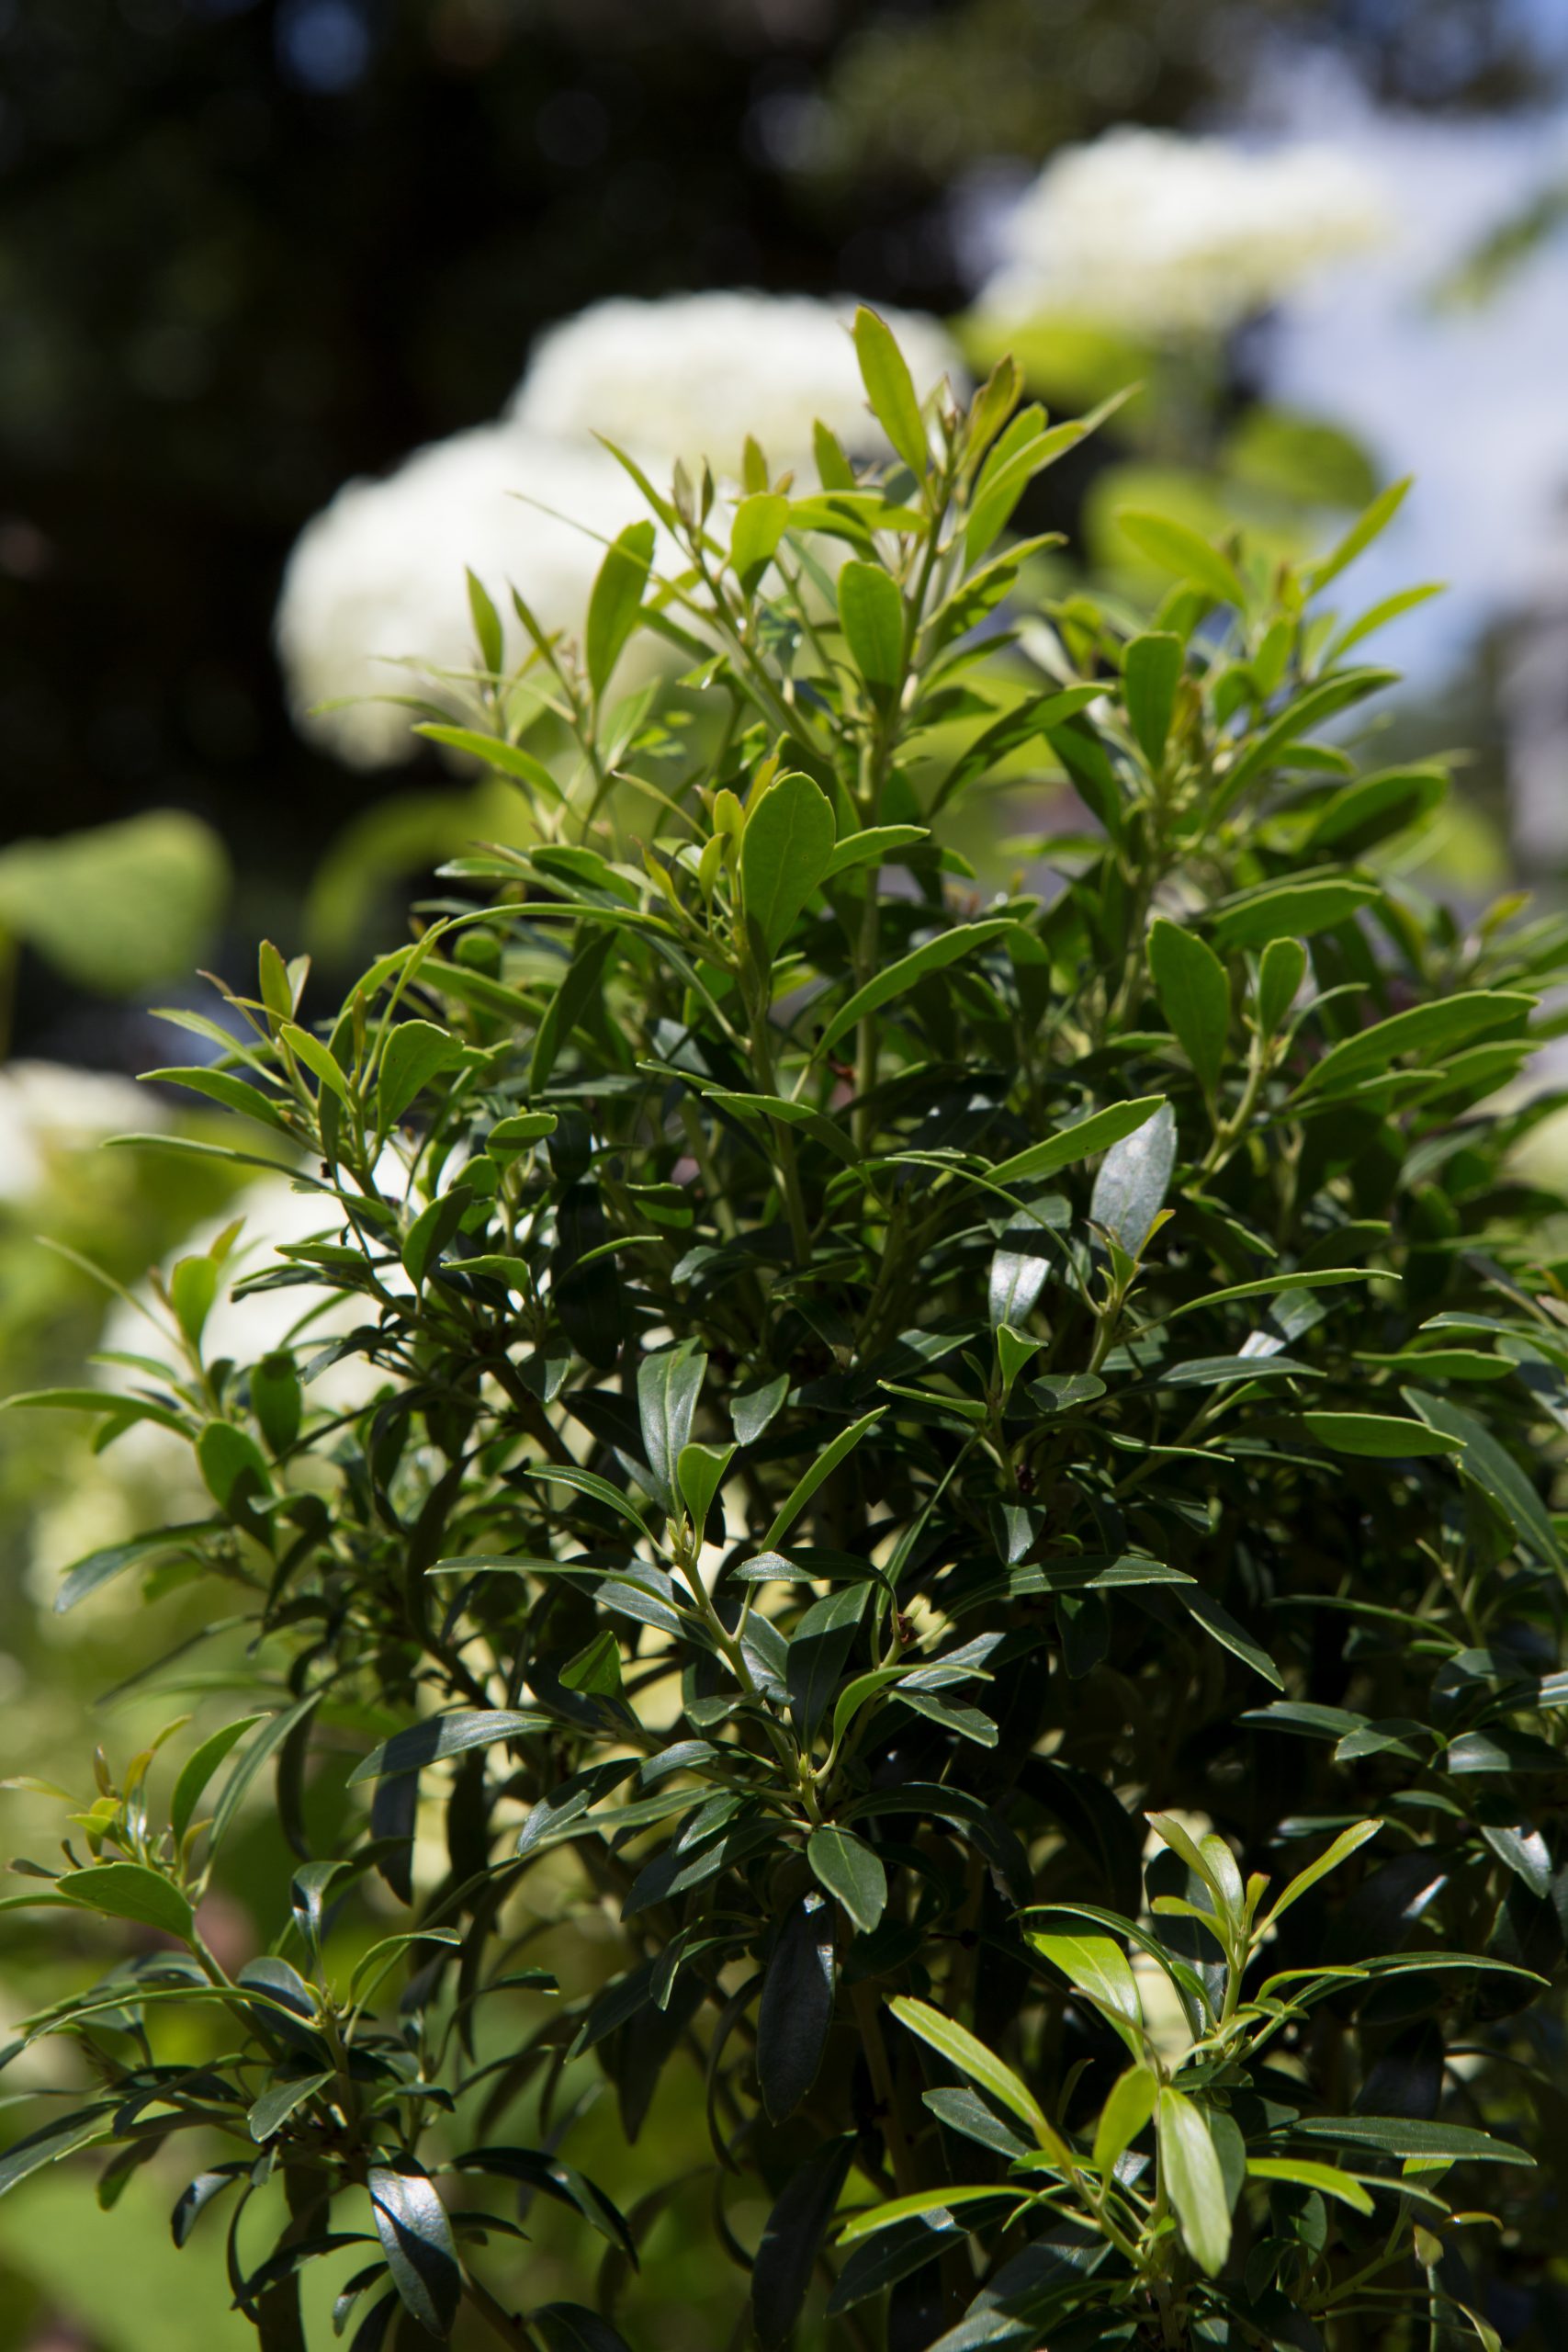 Evergreen Ilex glabra Gem Box®, a cultivar of native inkberry holly, makes a great substitute for boxwood in short hedges or even containers, with its smaller lustrous leaves, low branching, and dense growth in a tidy ball shape. It does very well in the Southeast.